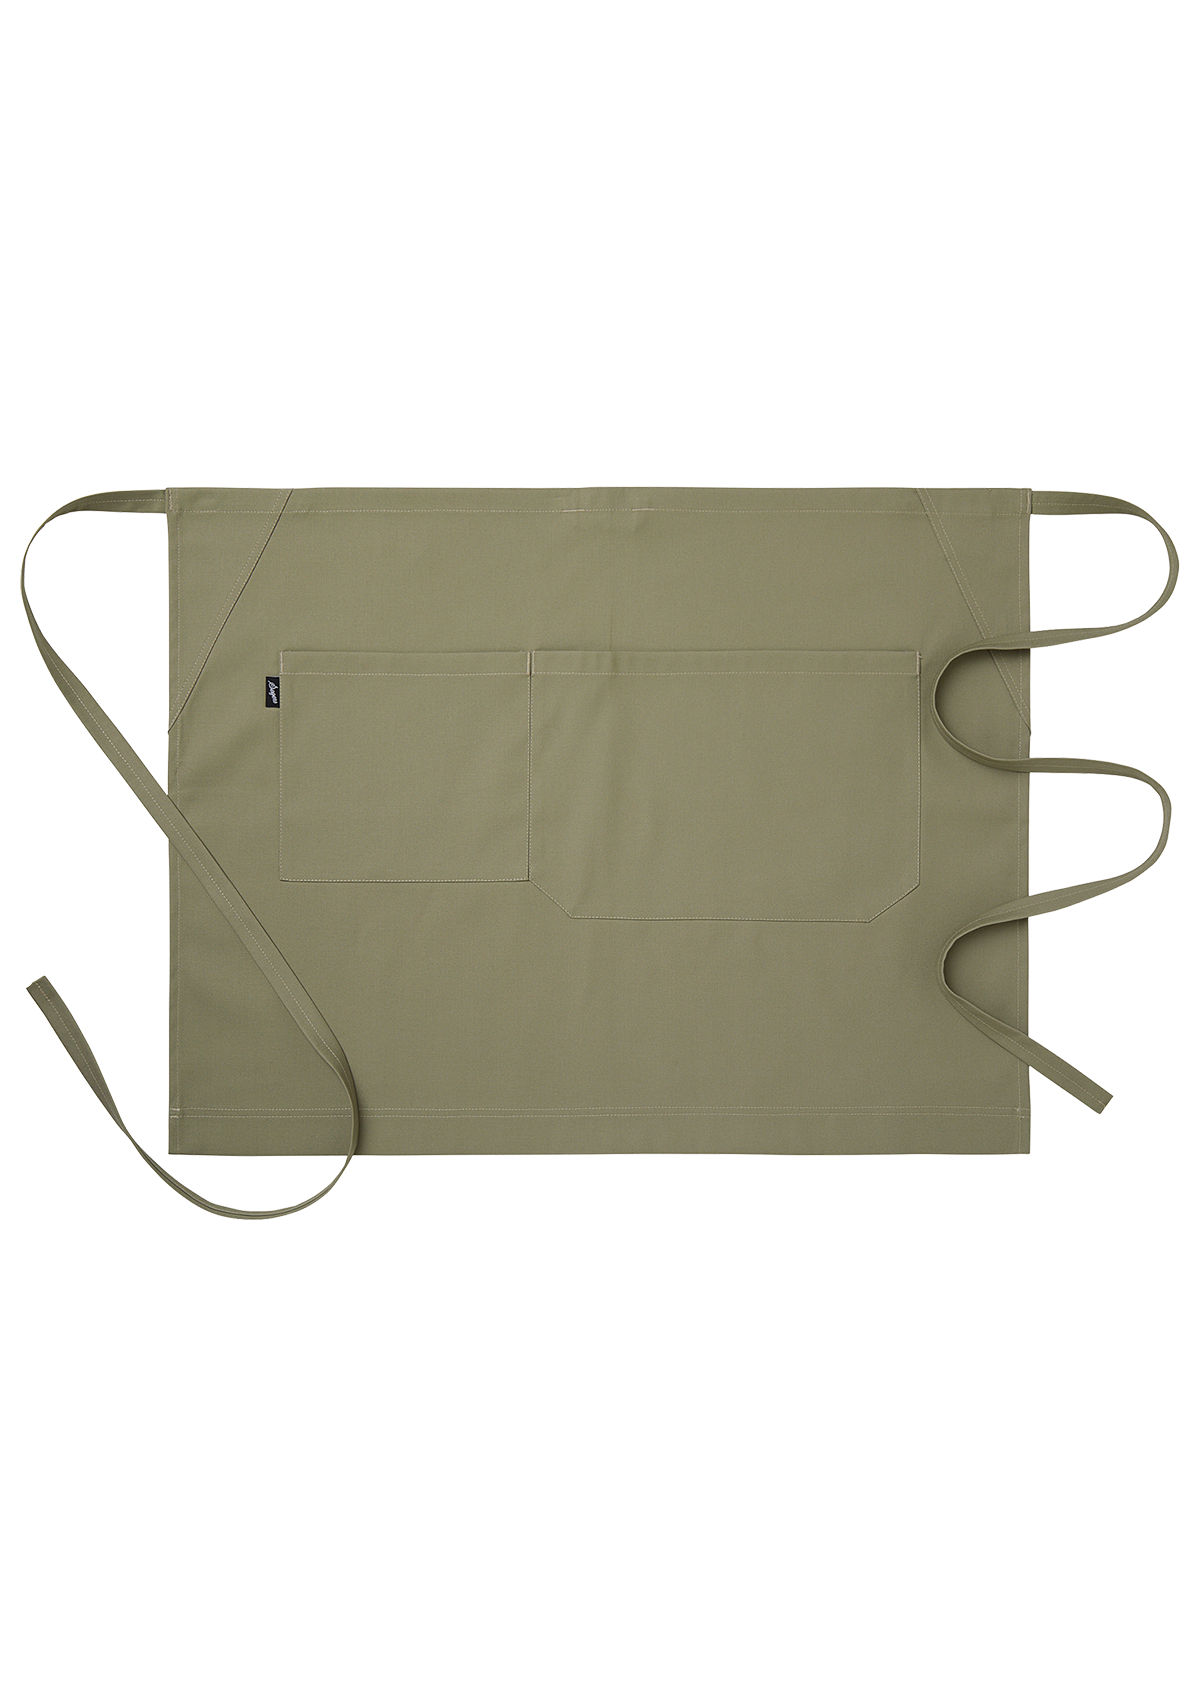 Unisex waist apron with side and inside pockets. Segers | Cookniche